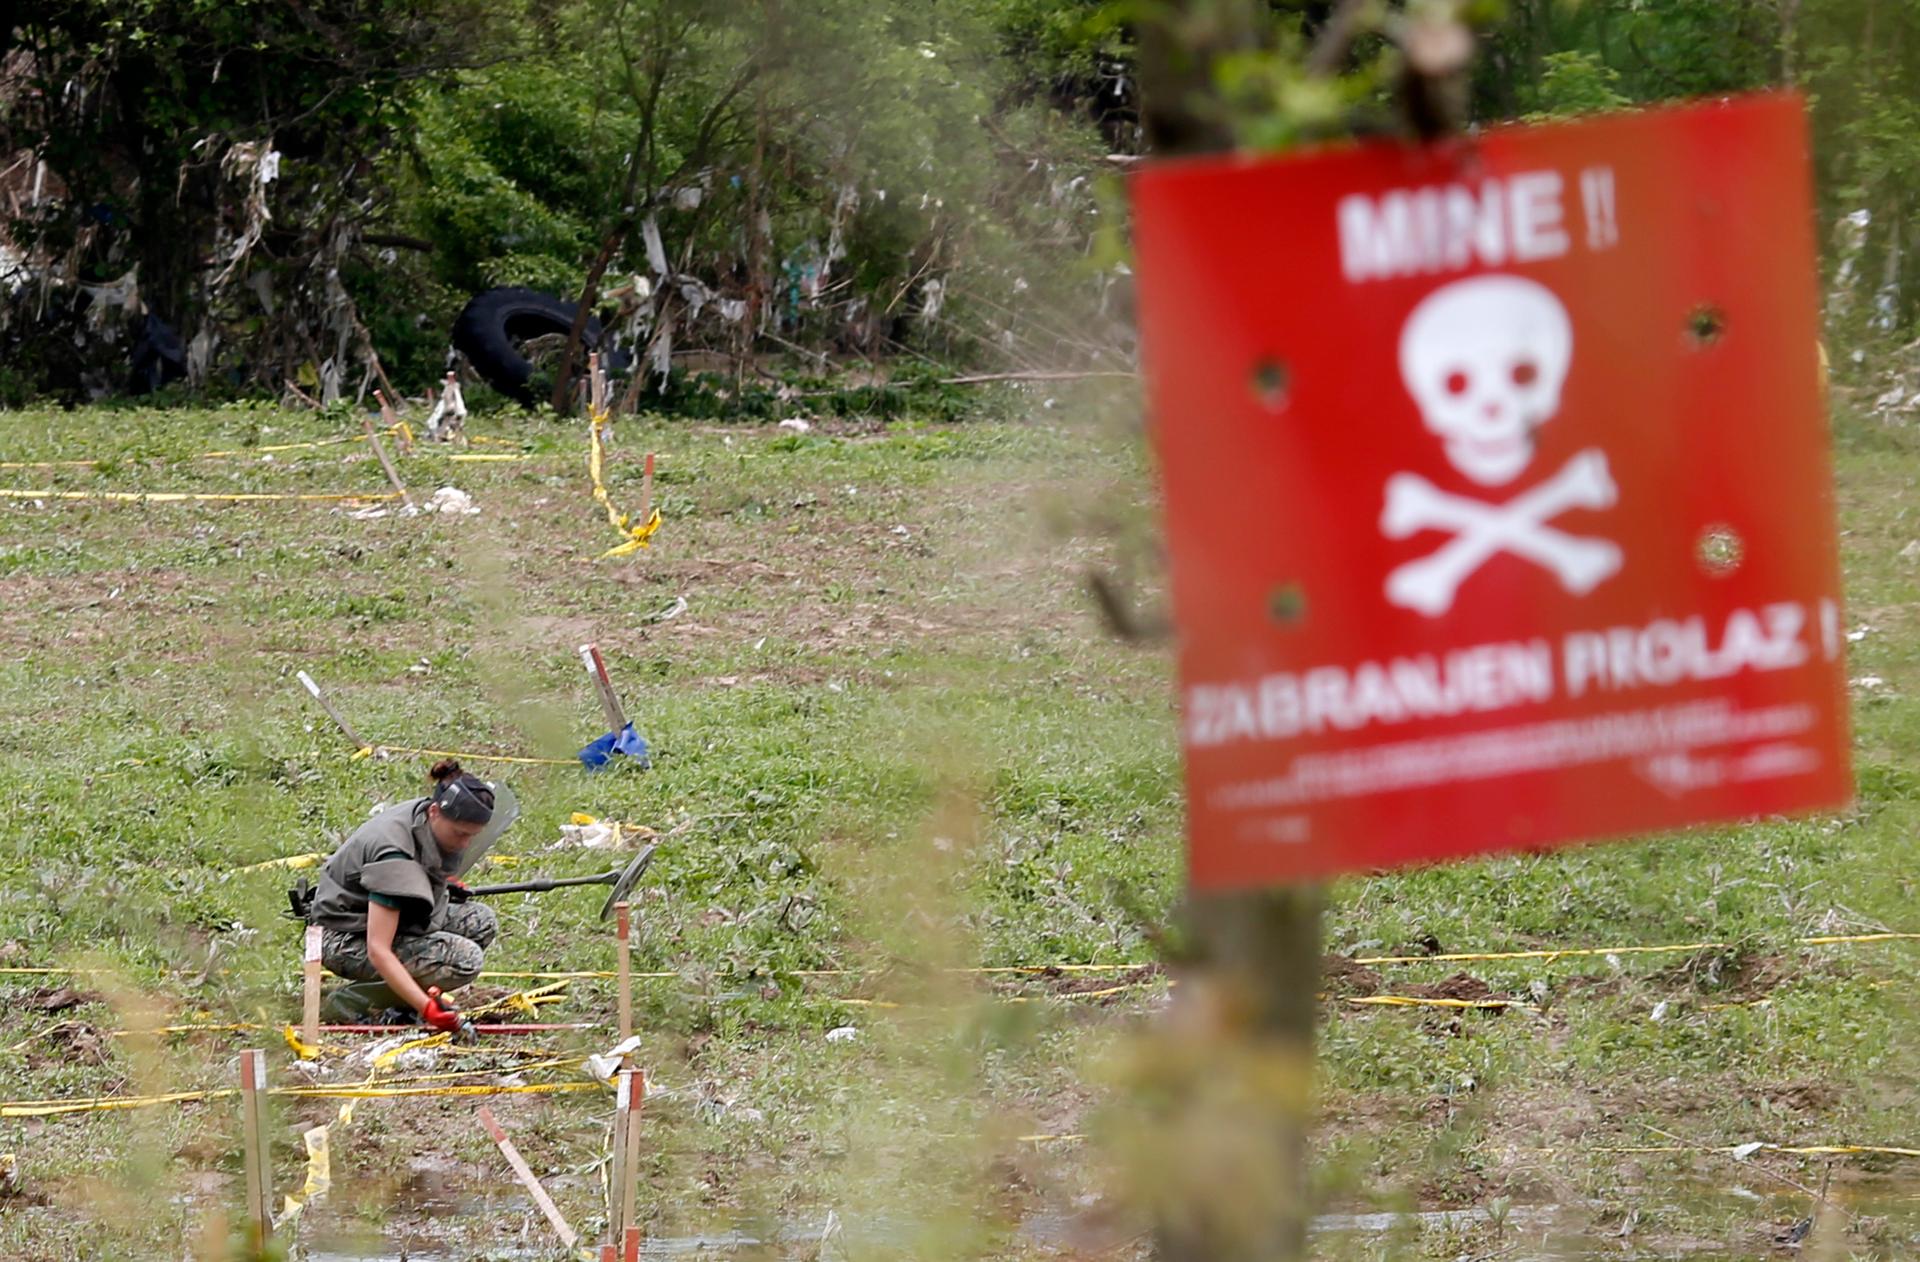 Injuries and fatalities from landmine explosions globally have fallen since the creation of an international mine ban treaty in 1997, though 4,000 fatalities still occur annually. Here, demining efforts followed a landslide in Bosnia & Herzegovina in May.